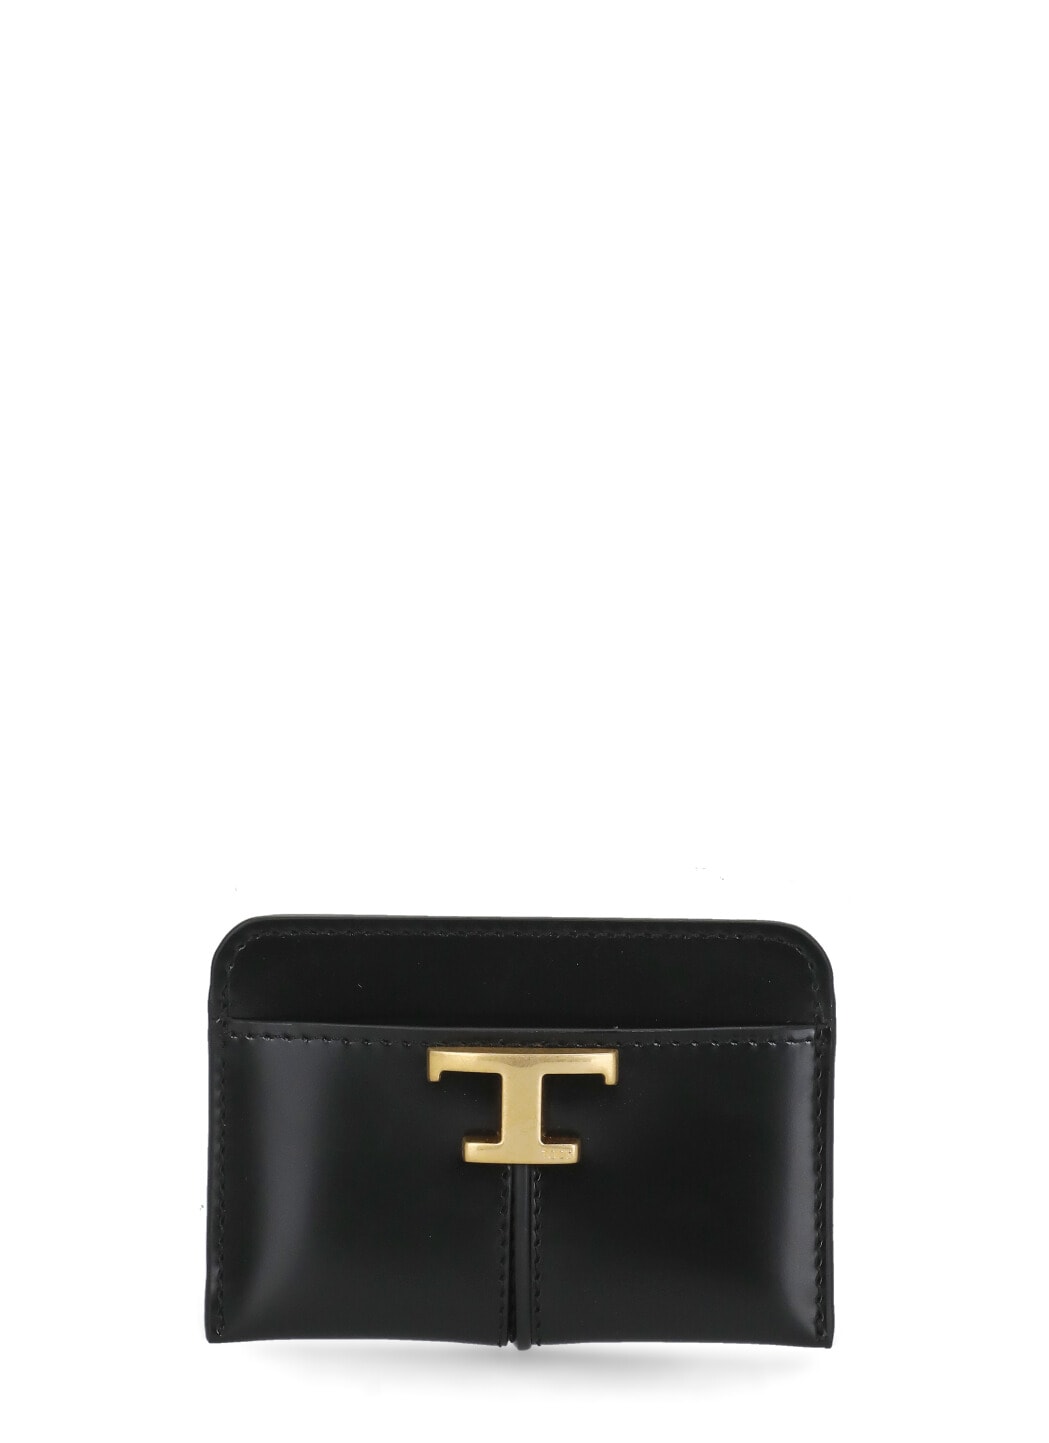 TOD'S LEATHER CARD HOLDER